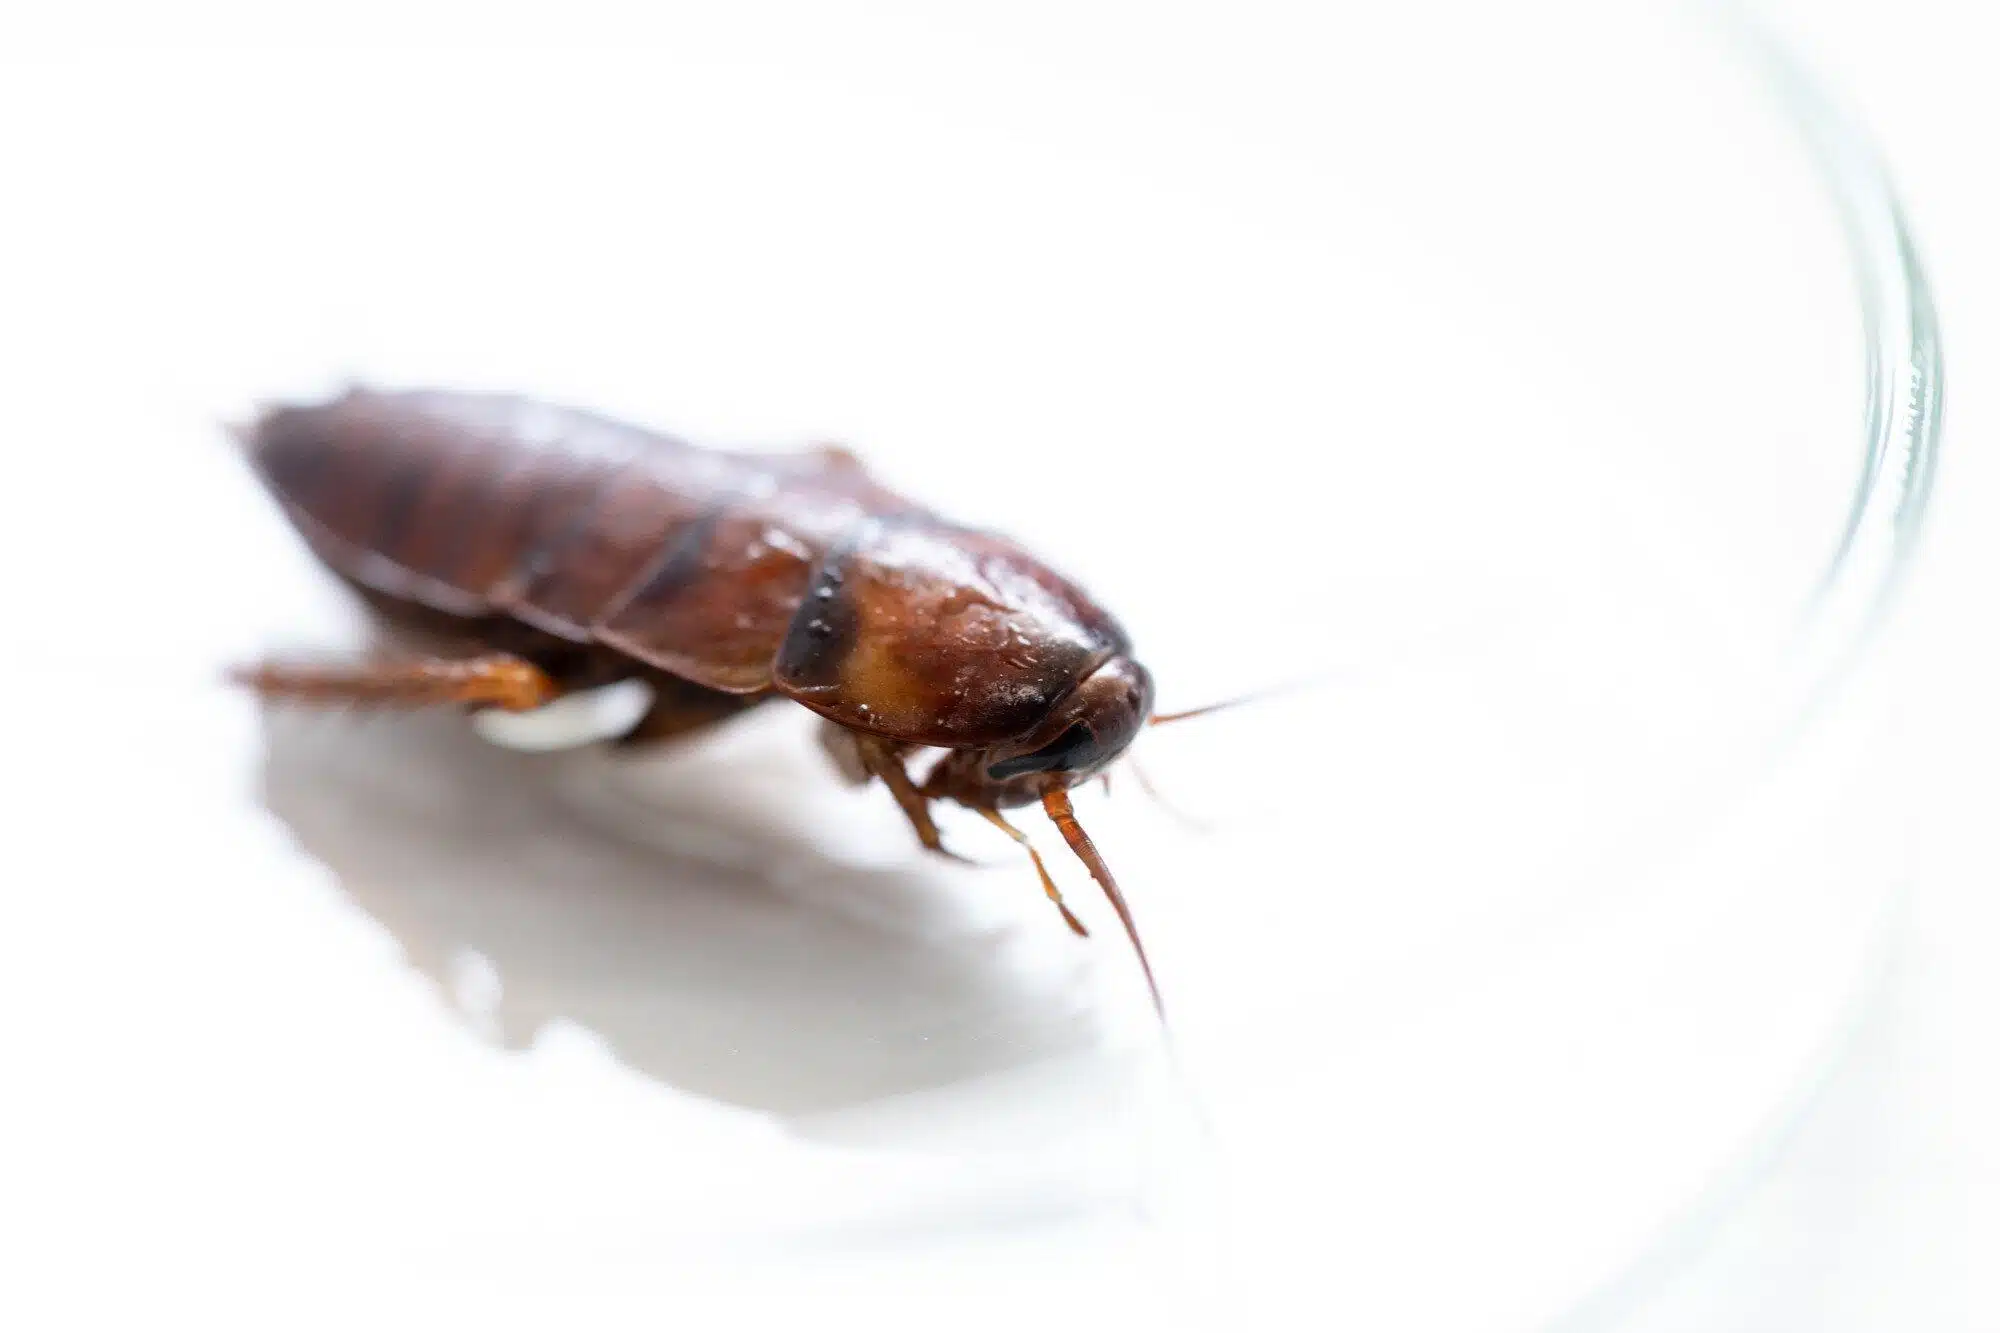 Cockroach front